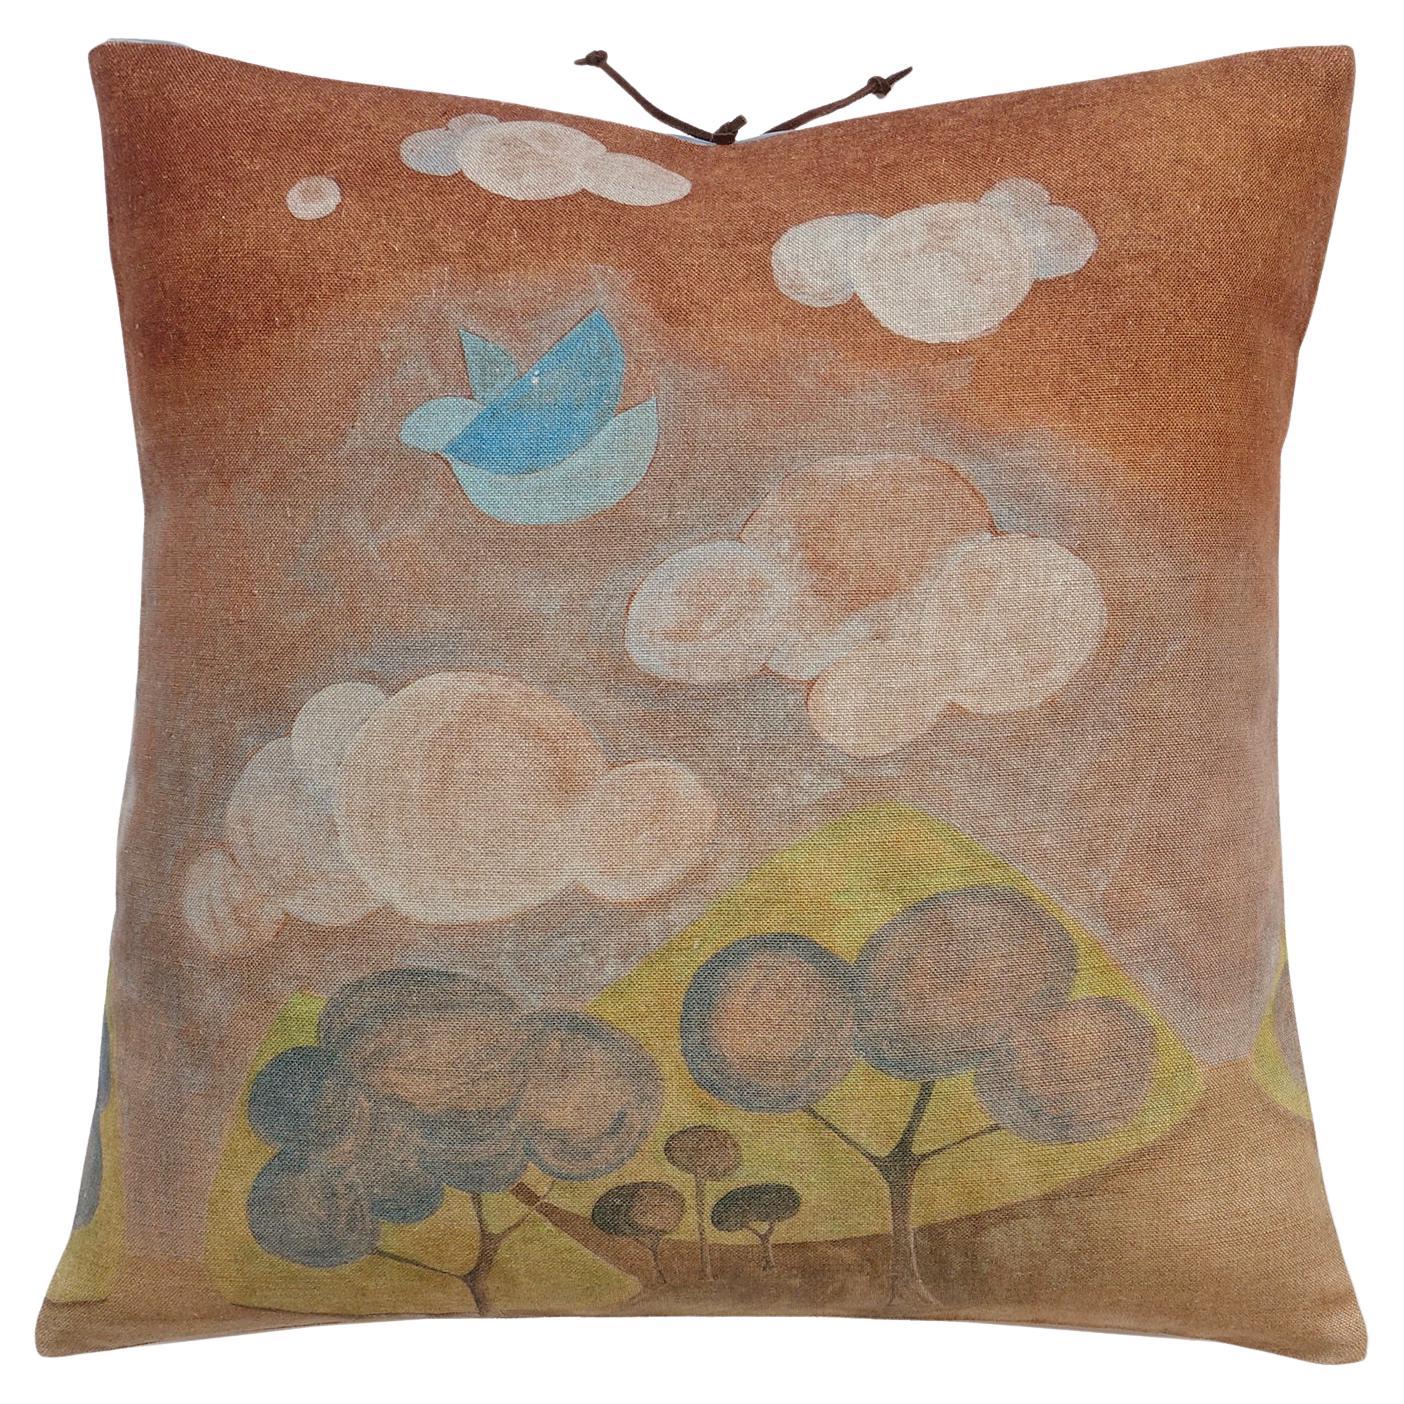 Printed Linen Pillow Happy Place Flax For Sale